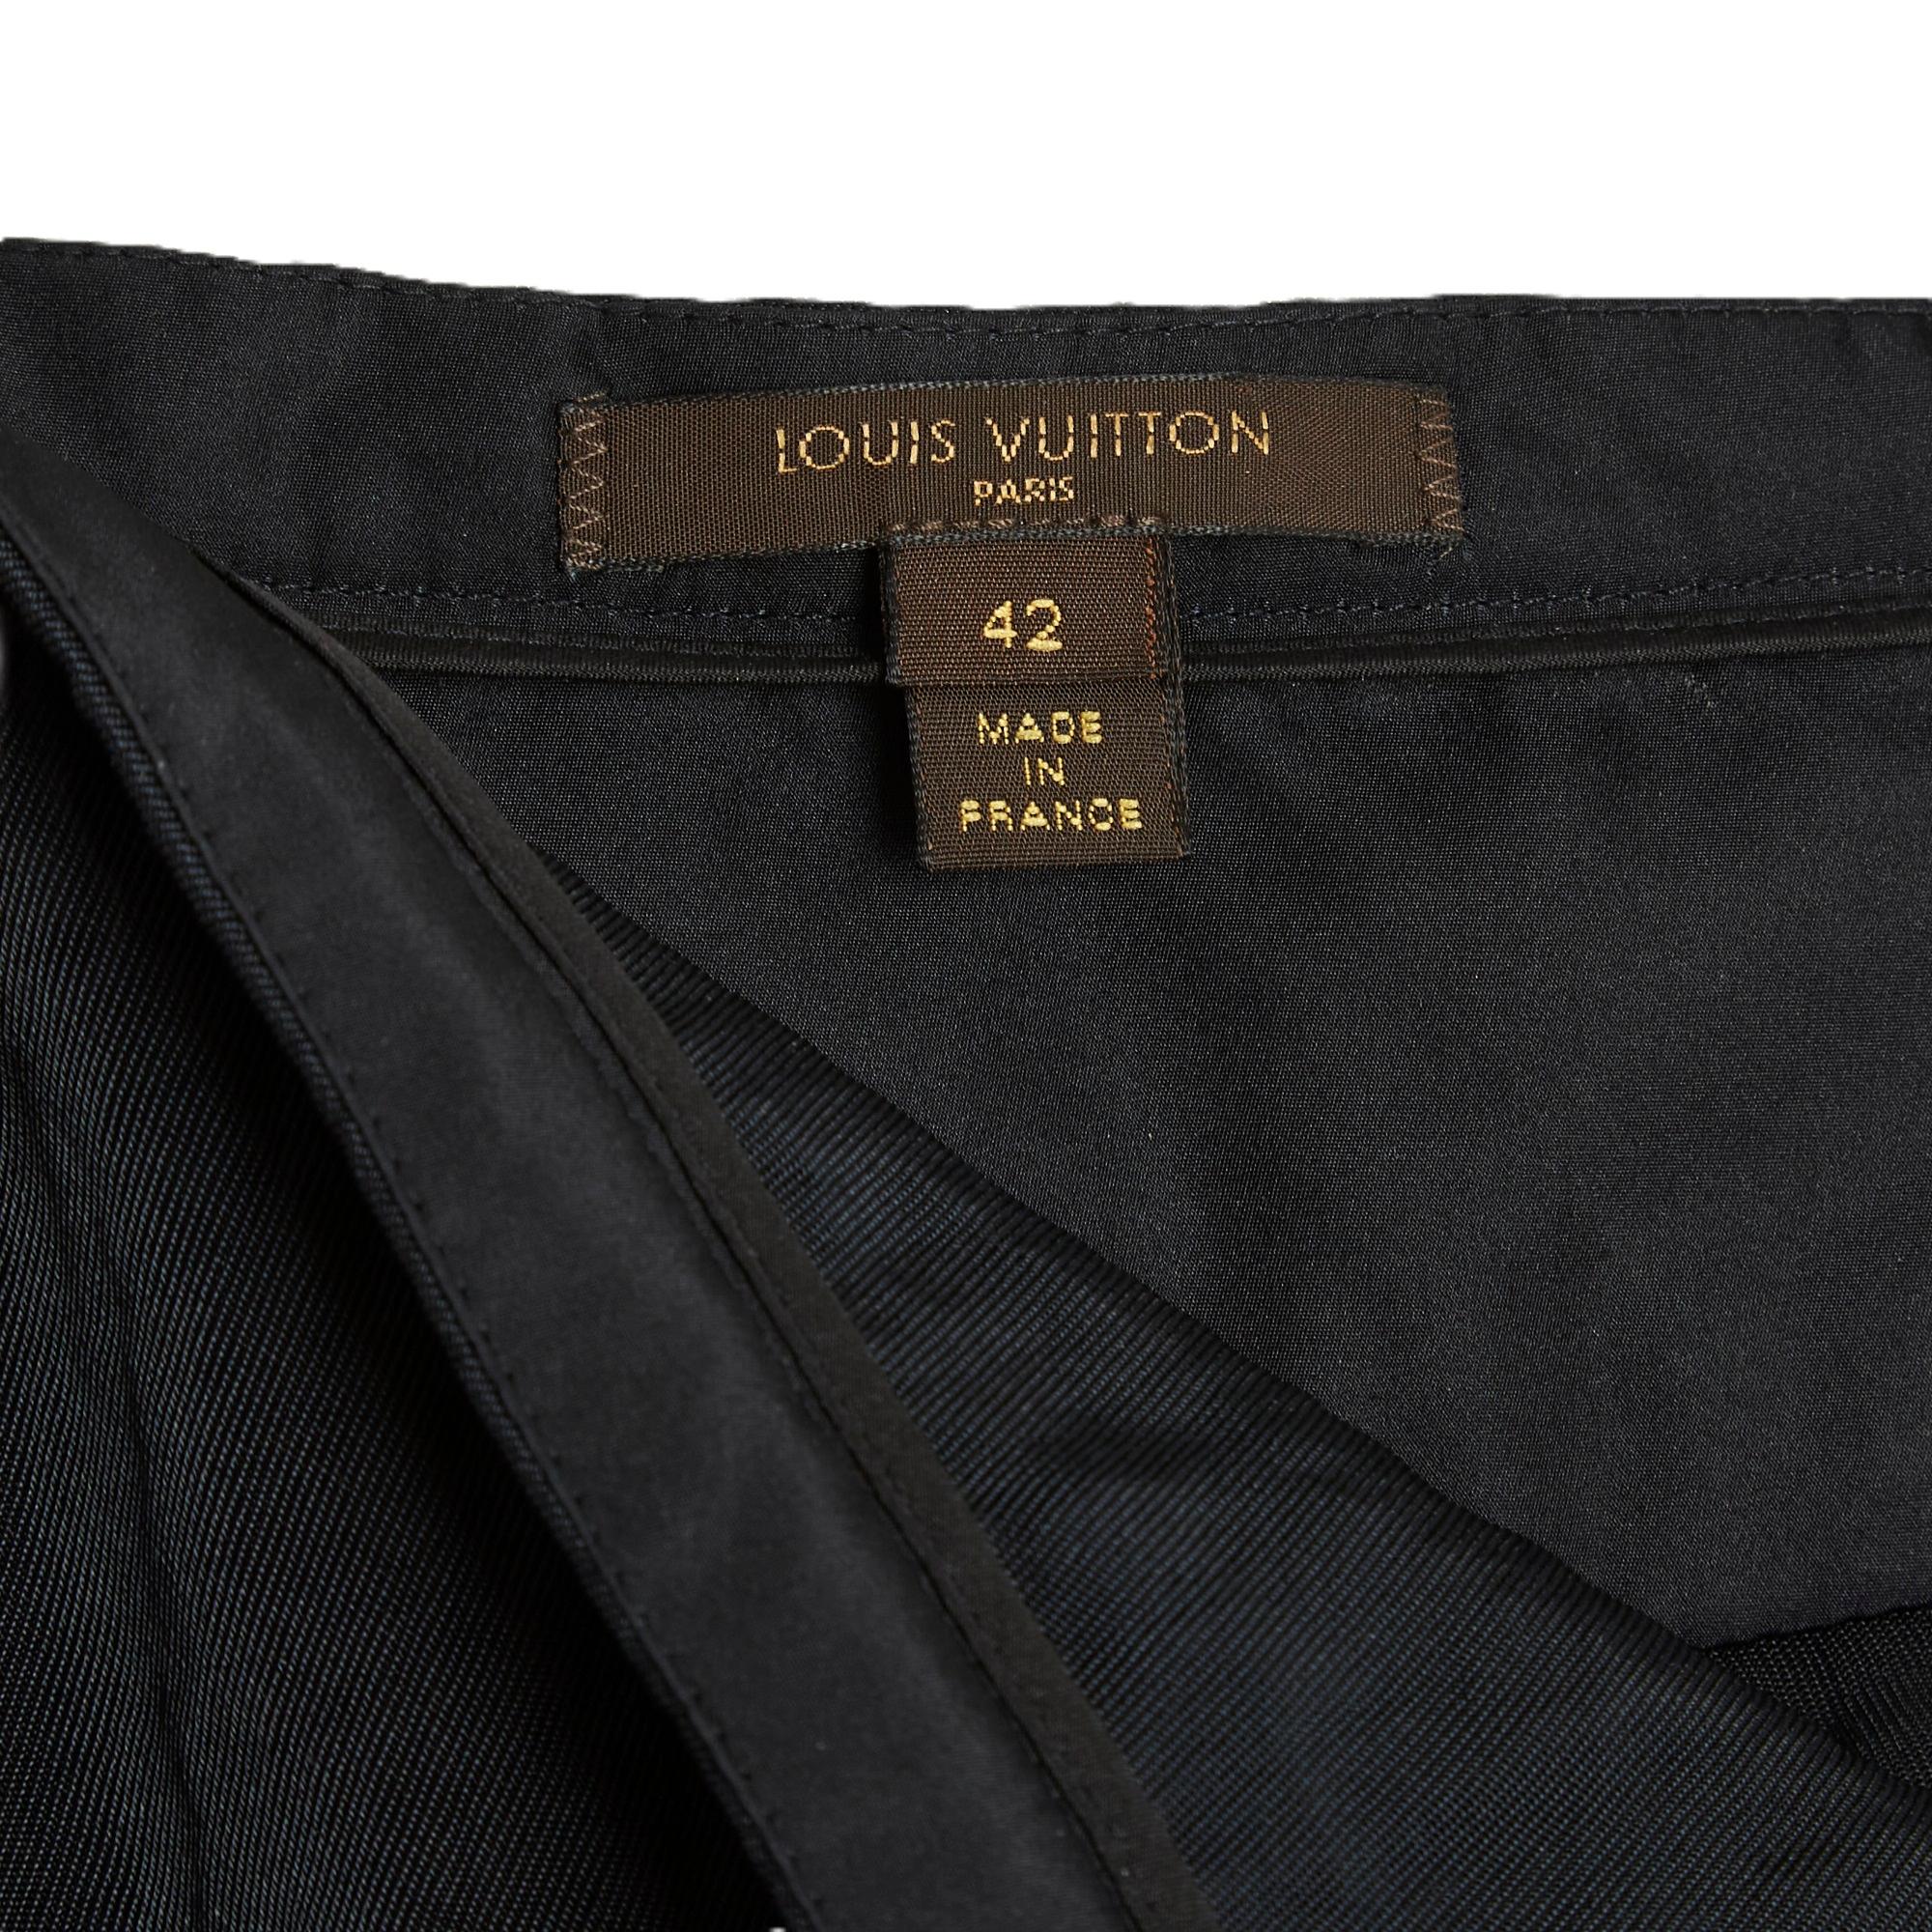 Louis Vuitton skirt in thick woven slightly shimmering polyamide, straight shape at the front and large box pleats from the bottom of the back, lining (unfortunately not visible in the photos) of the pleats at the back with a black veil which